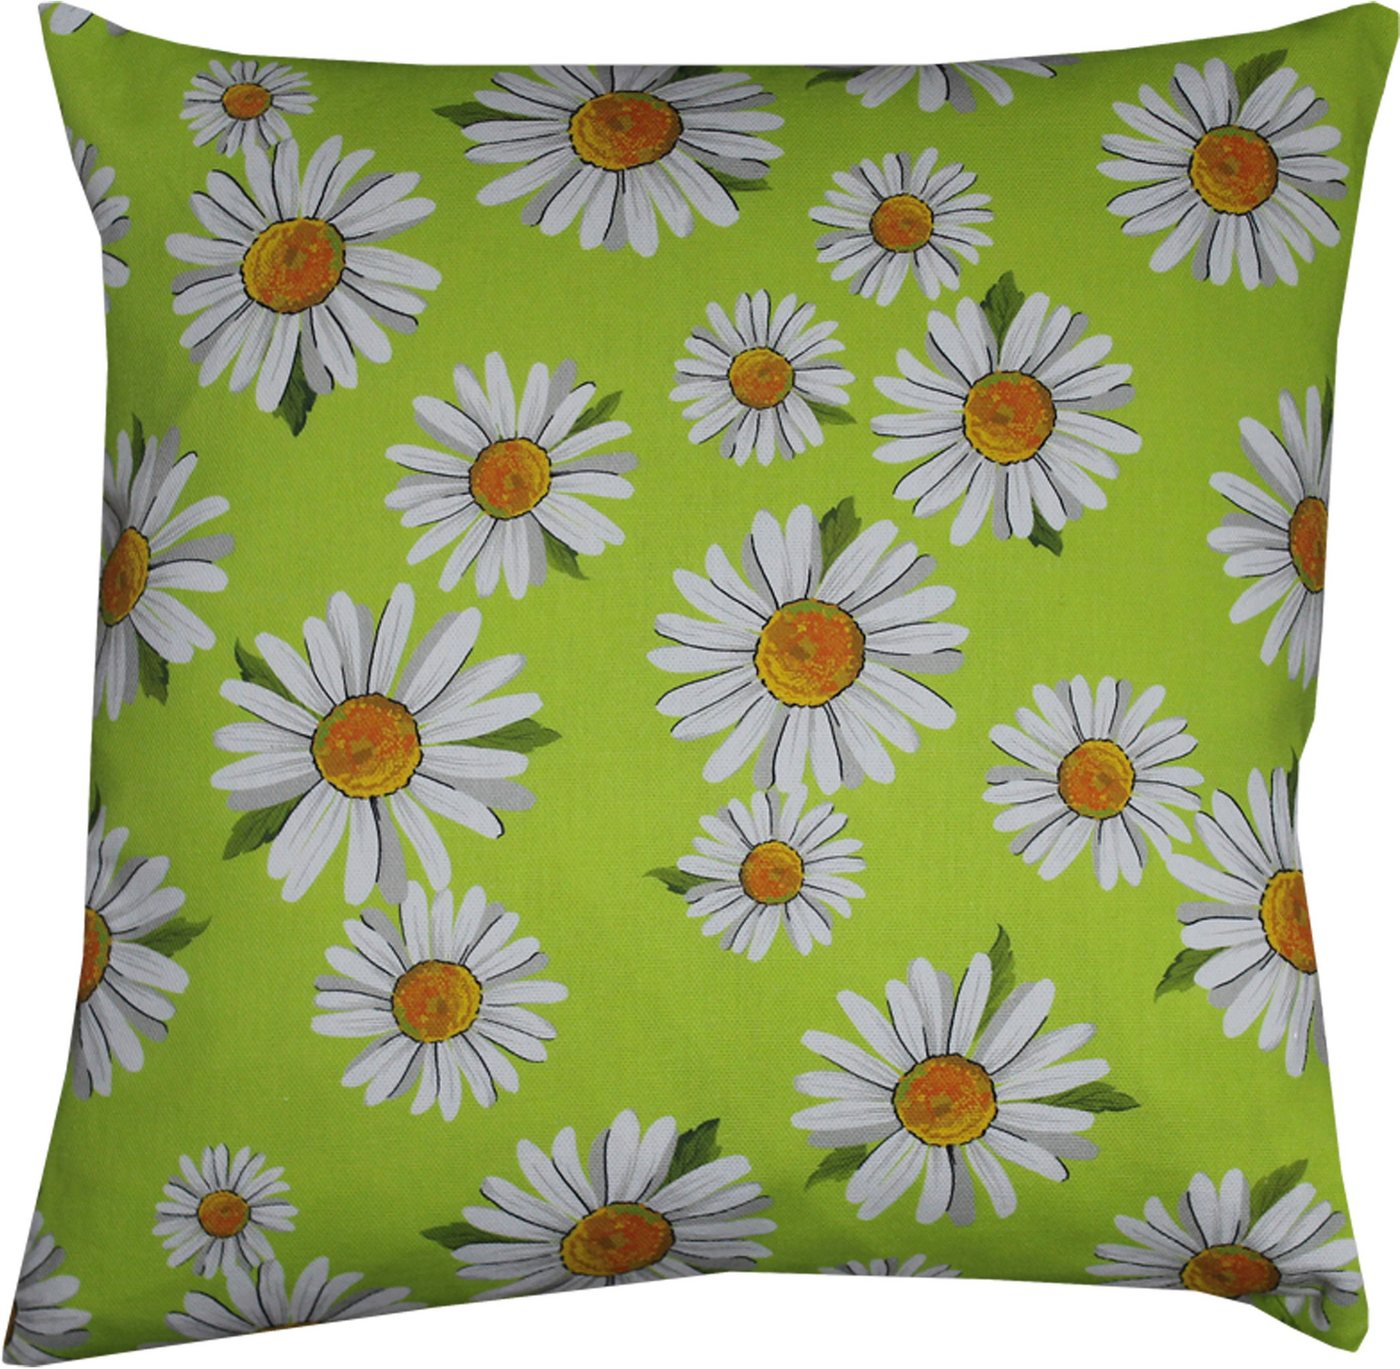 Kissenhülle Daisies, HOSSNER - HOMECOLLECTION (1 Stück) von HOSSNER - HOMECOLLECTION